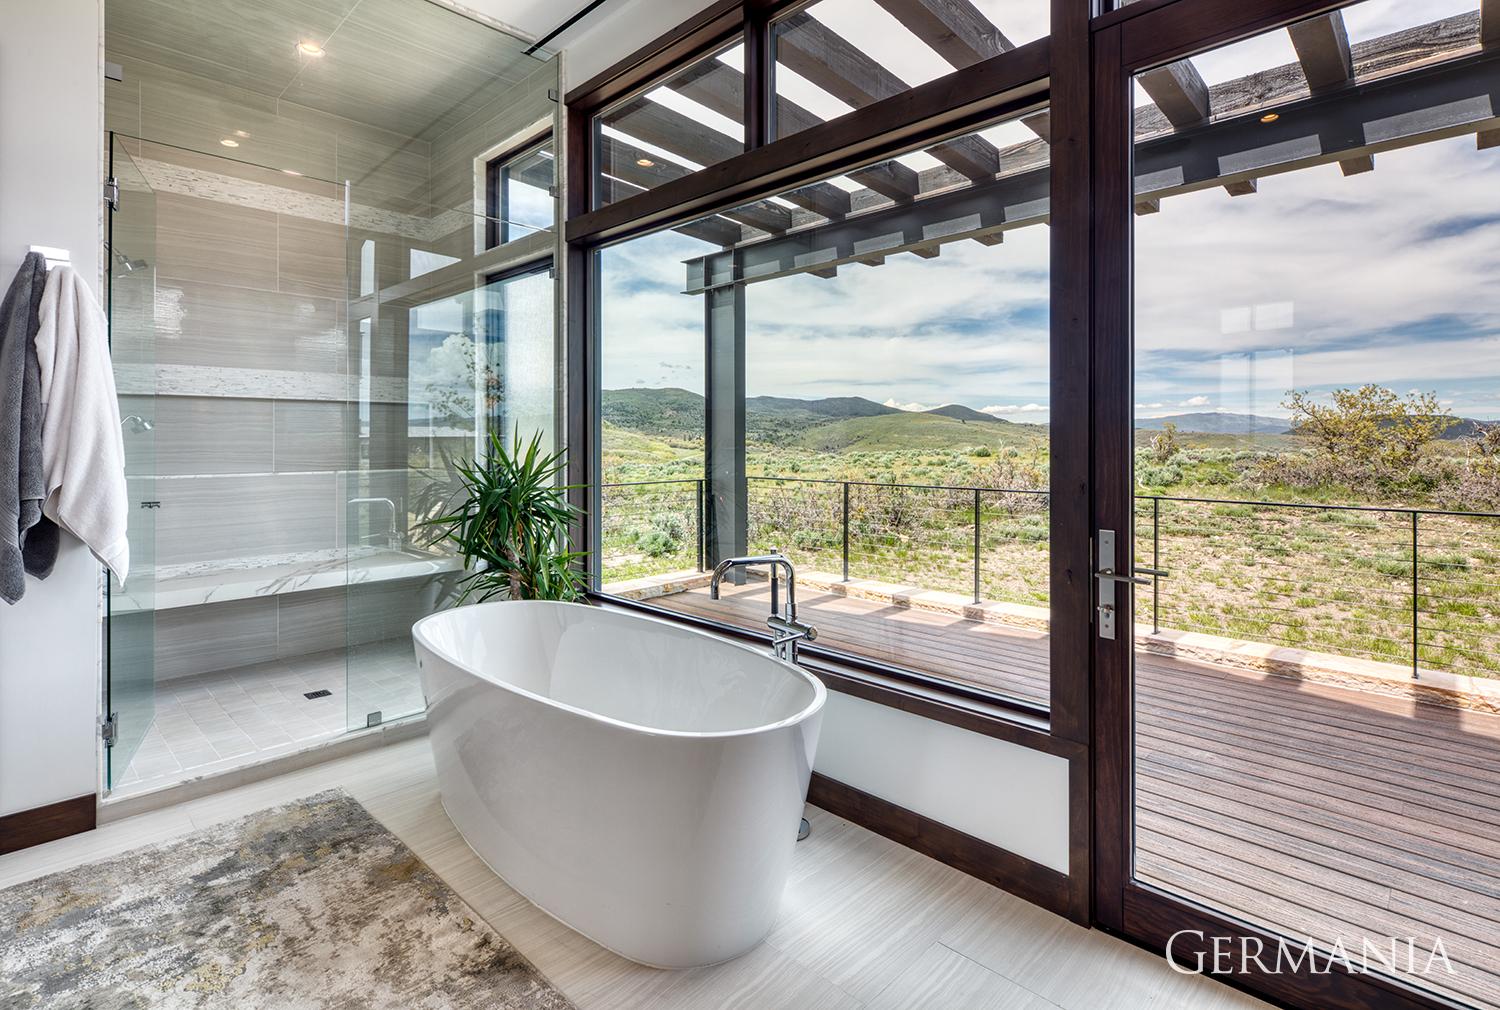 Featured here is a soaker bath tub and adjacent walk in shower with bench. Did we mention this bathroom also has a walk out deck?!